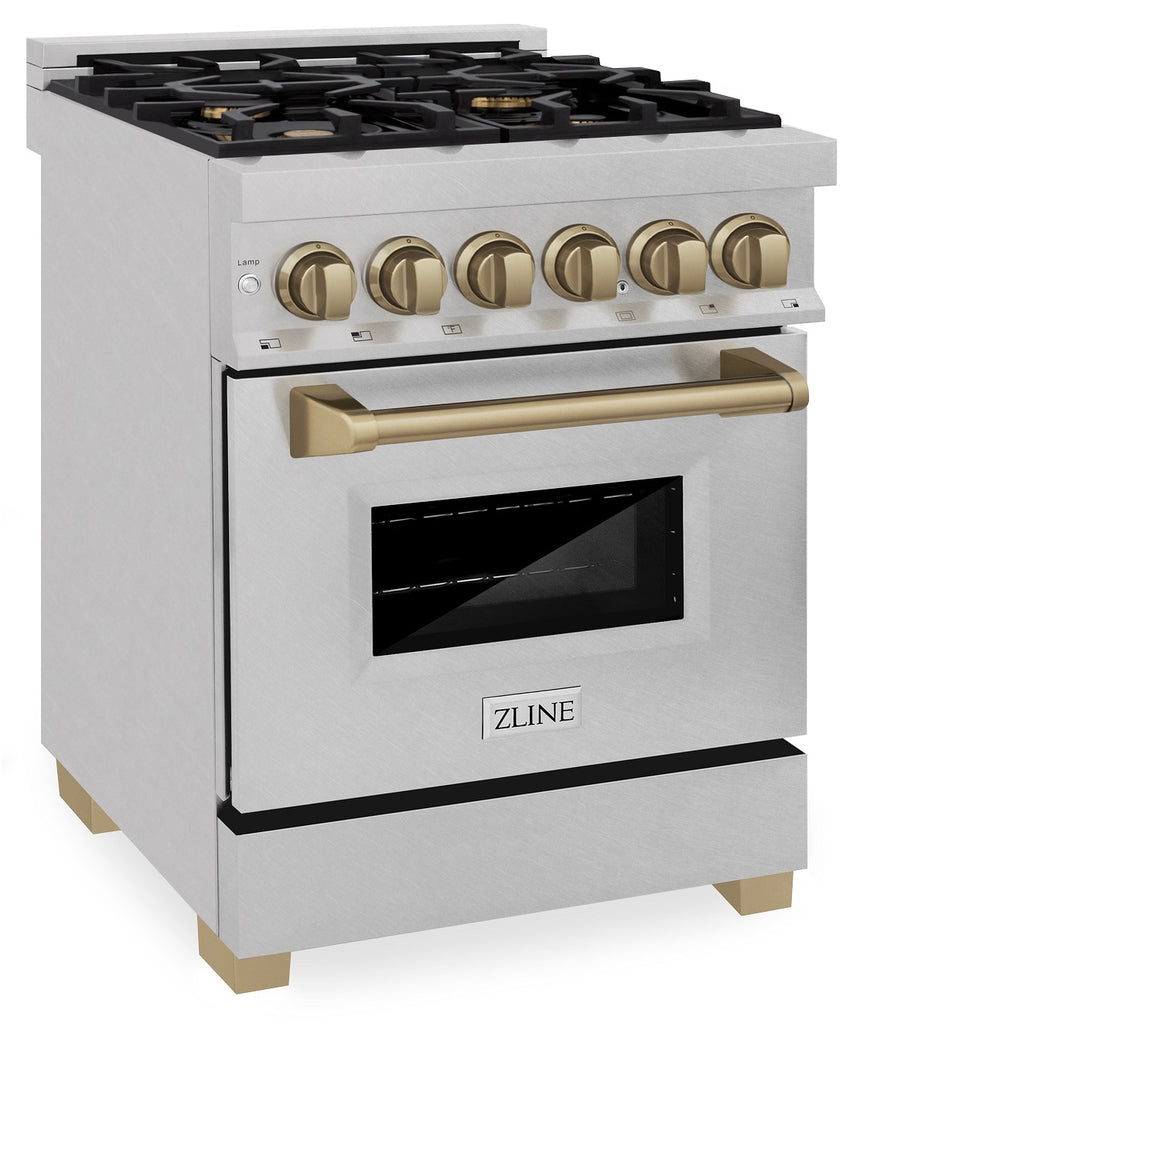 ZLINE Autograph Edition 24" 2.8 cu. ft. Dual Fuel Range in DuraSnow® Stainless Steel with Champagne Bronze Accents